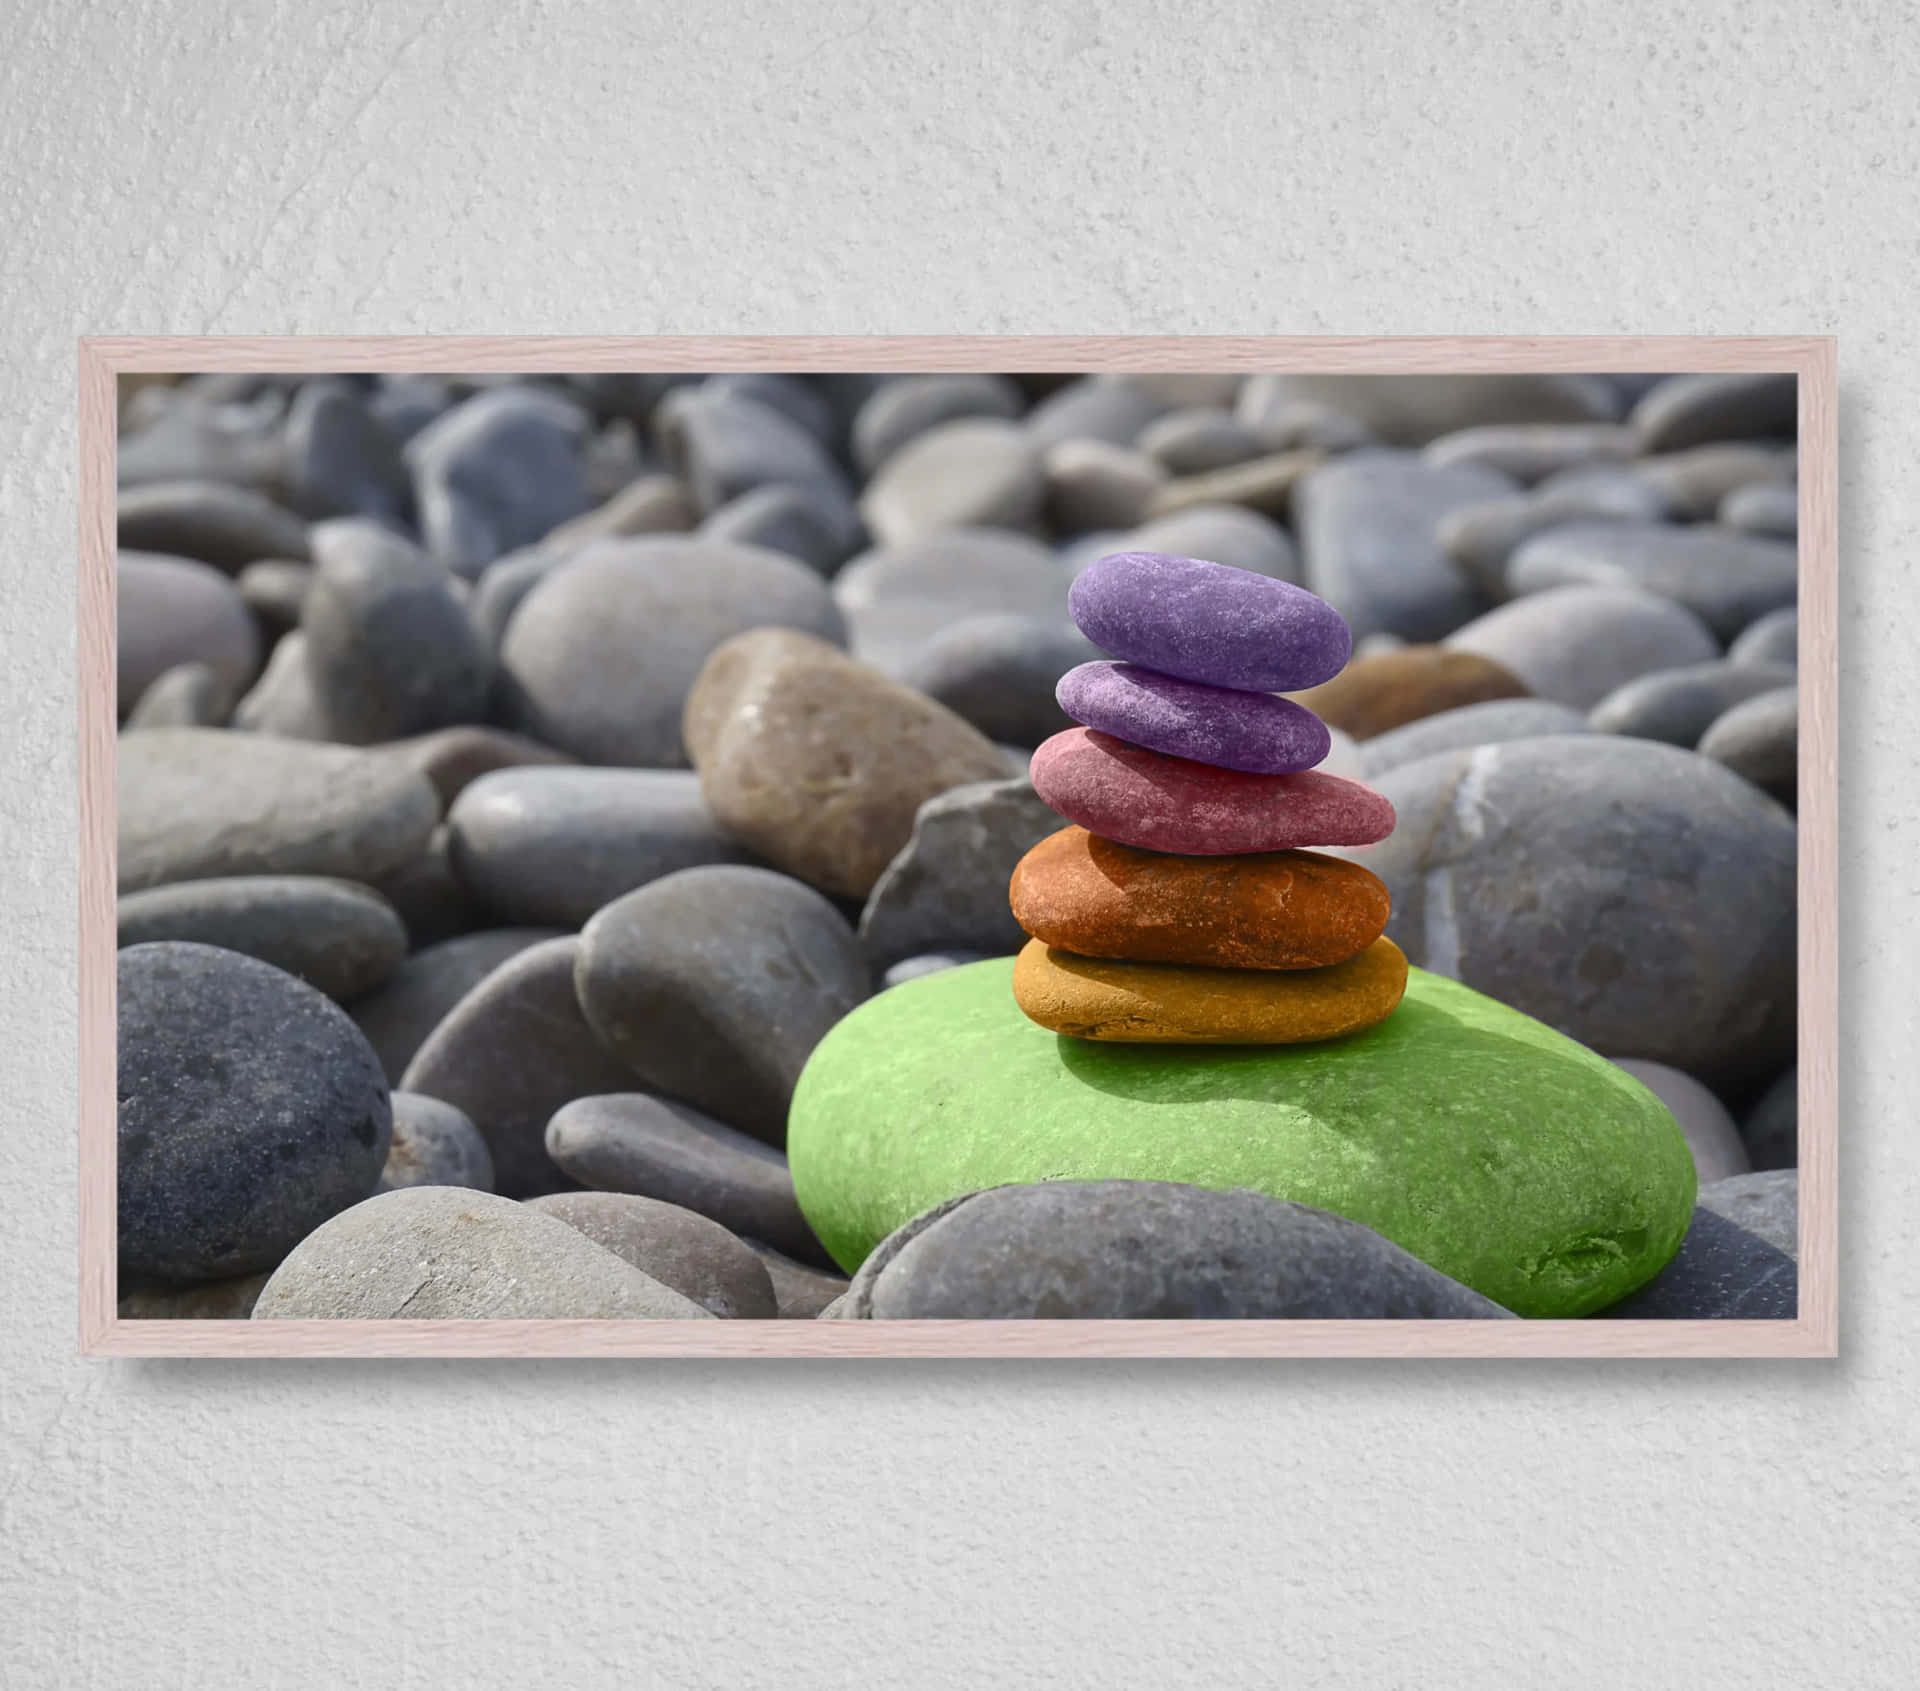 A Framed Picture Of Colorful Rocks On A White Background